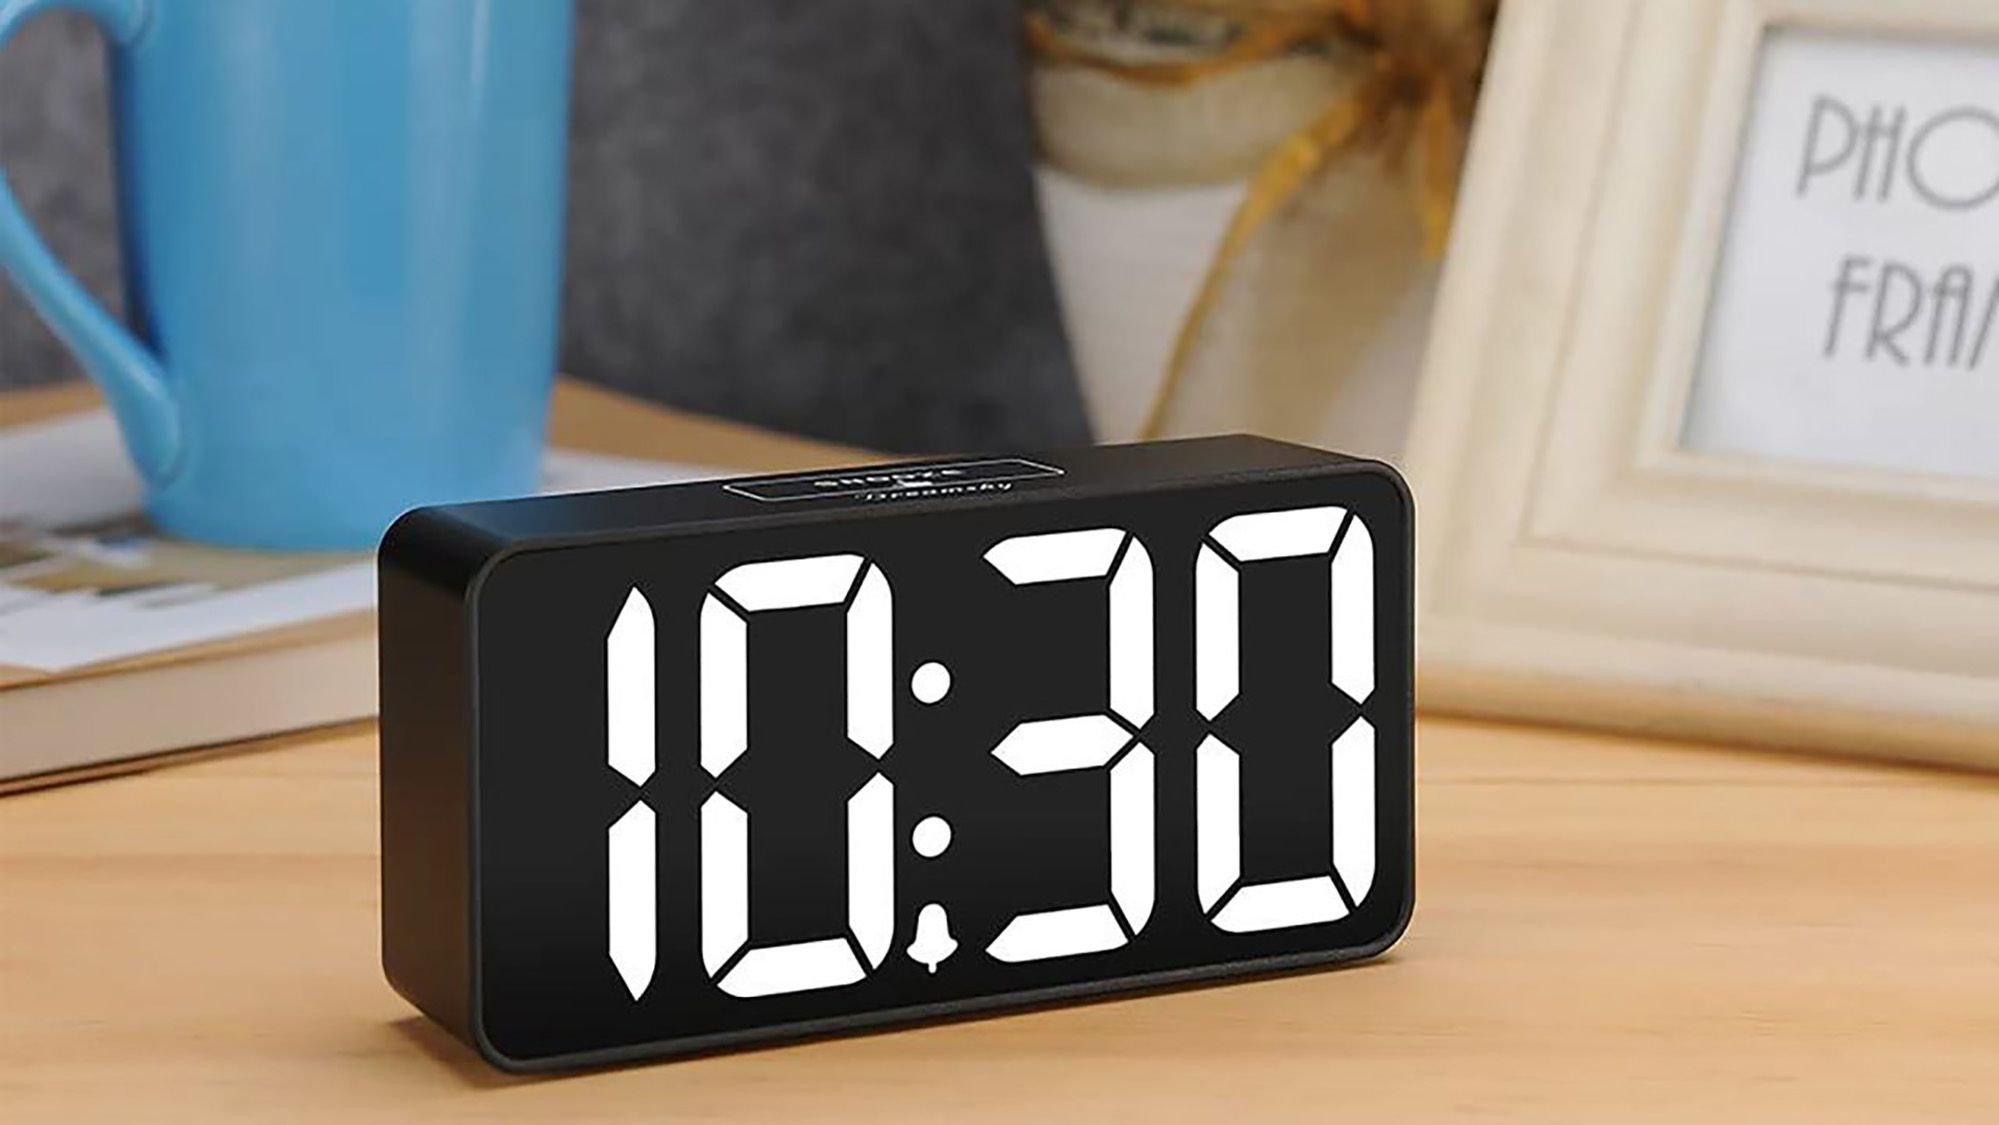 The DreamSky Alarm Clock is 42% off today